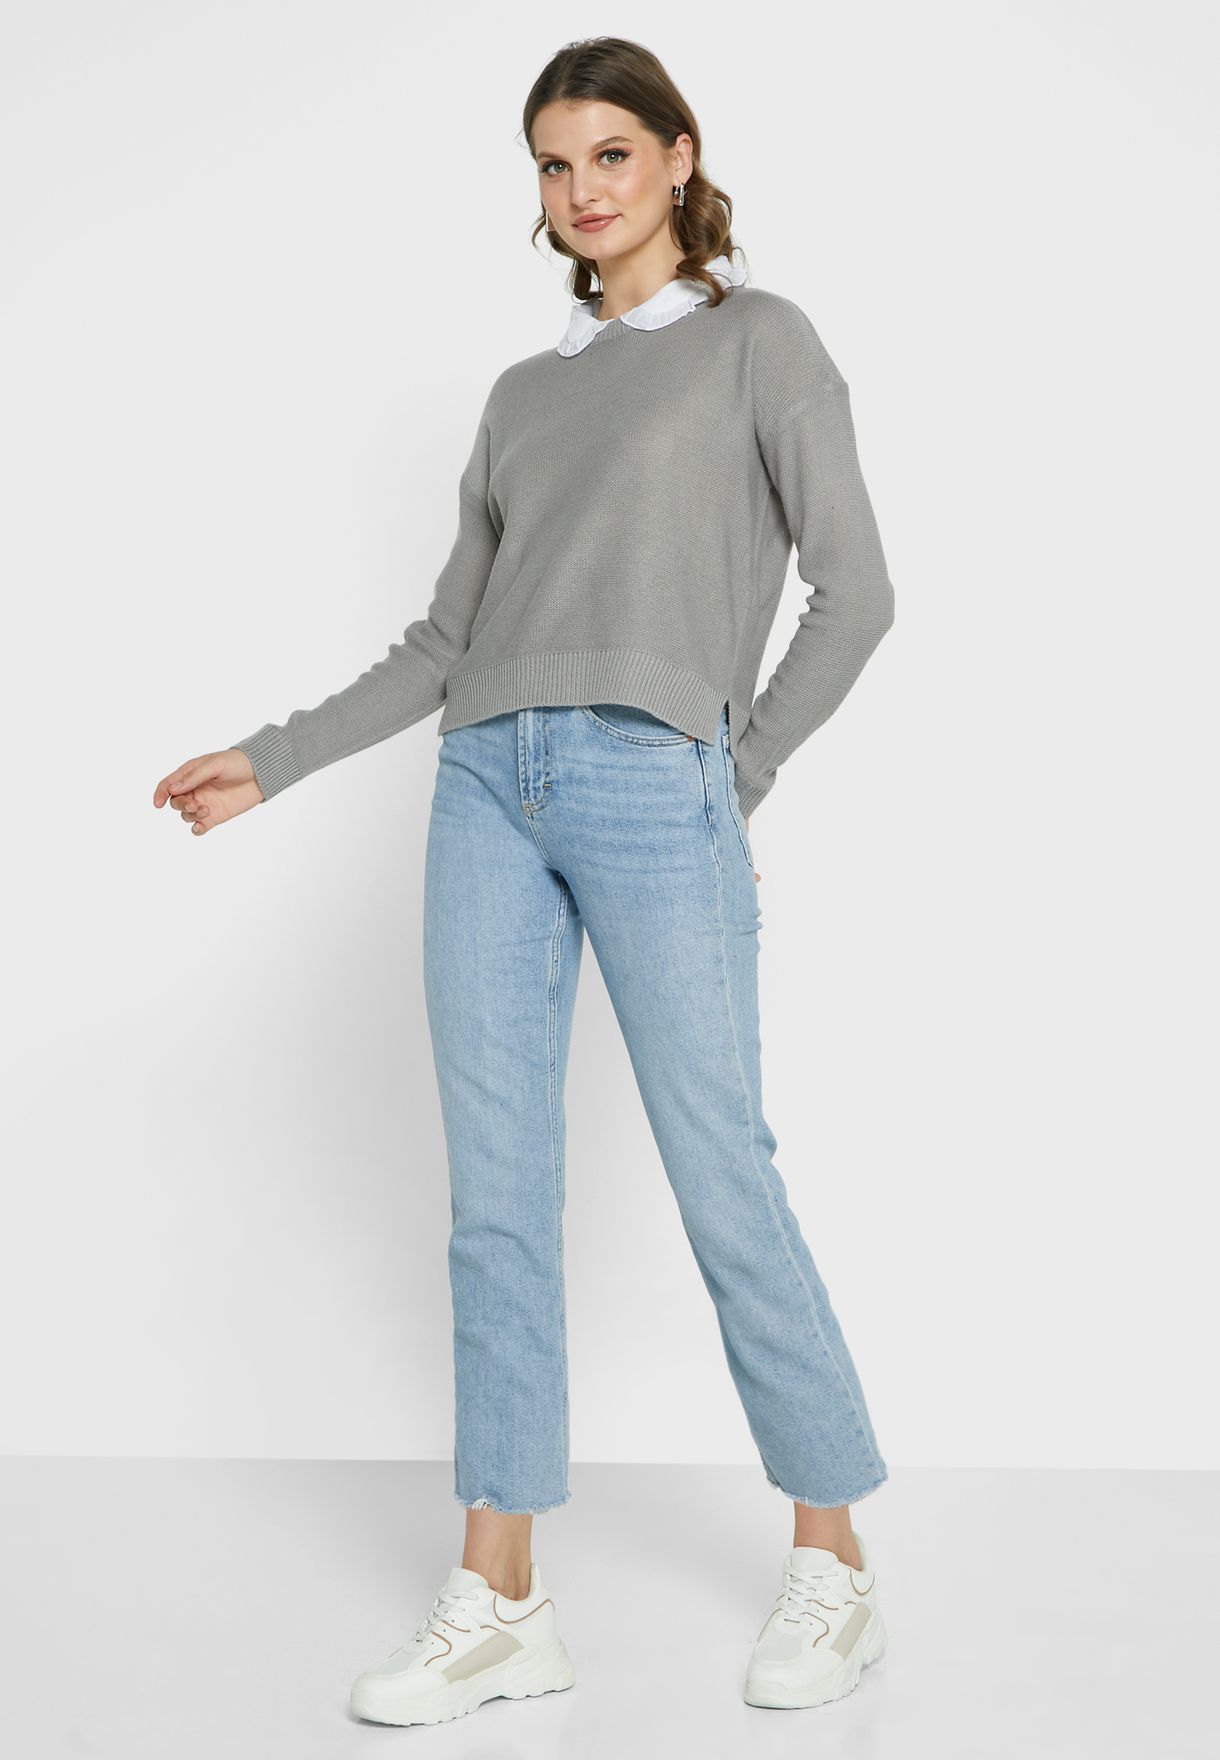 Crew Neck Jumper With Woven Collar